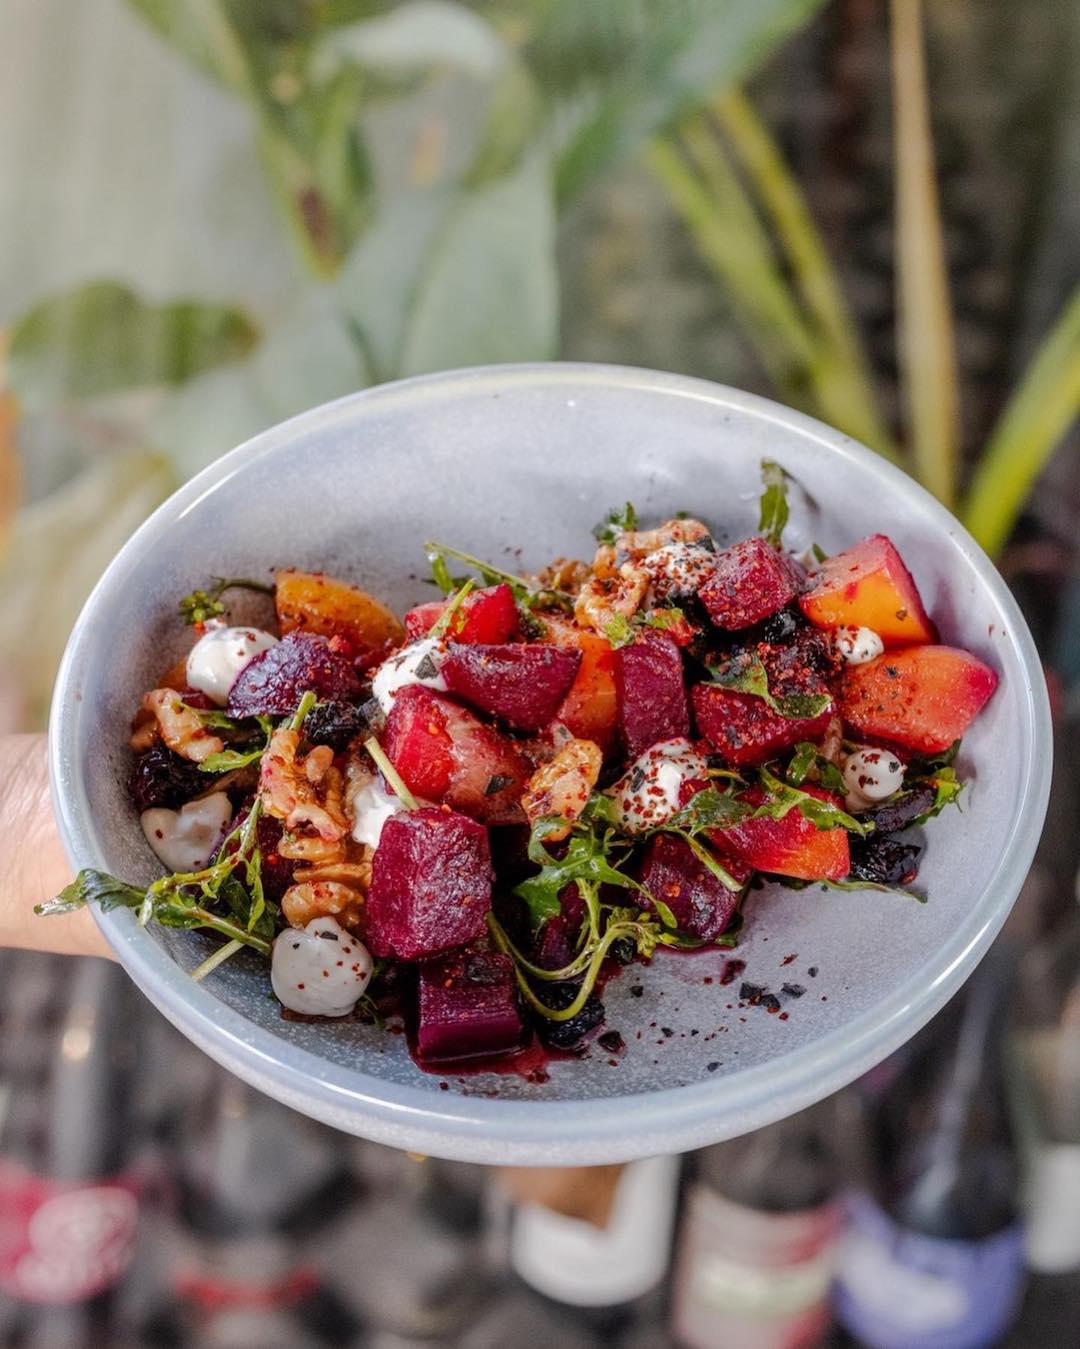 Lum's beetroot salad on offer this Valentine's Day